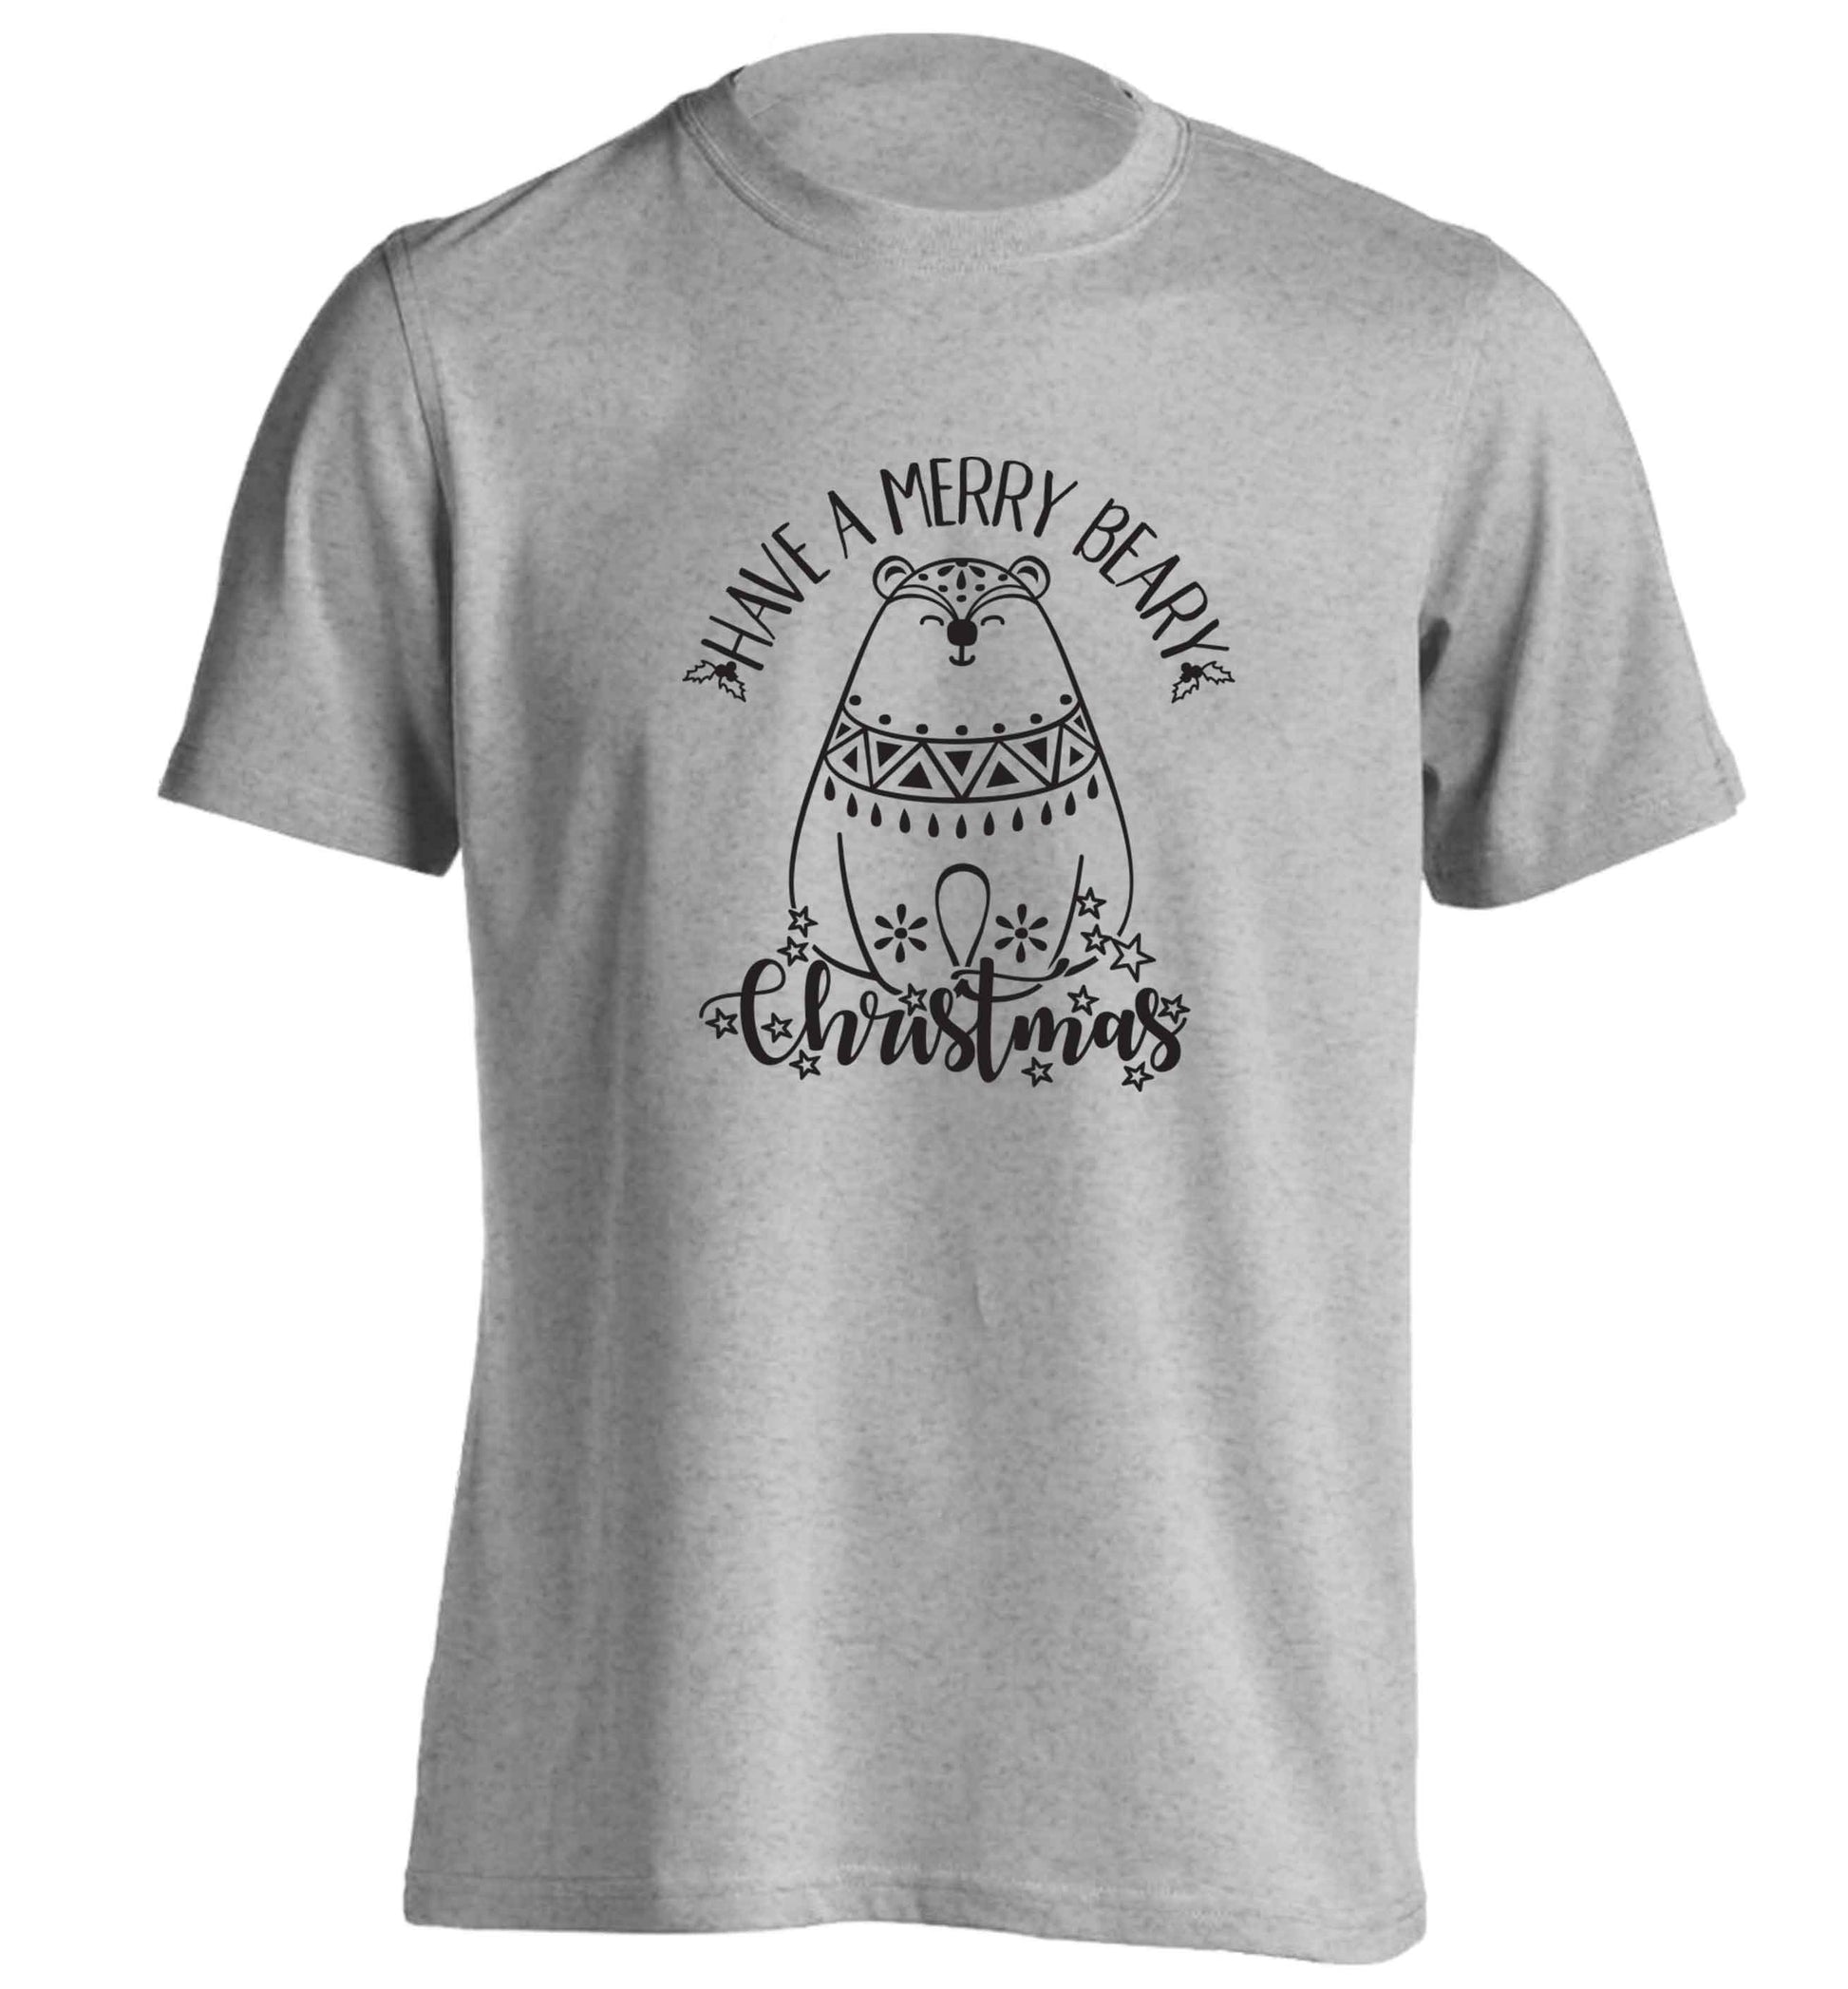 Have a merry beary Christmas adults unisex grey Tshirt 2XL